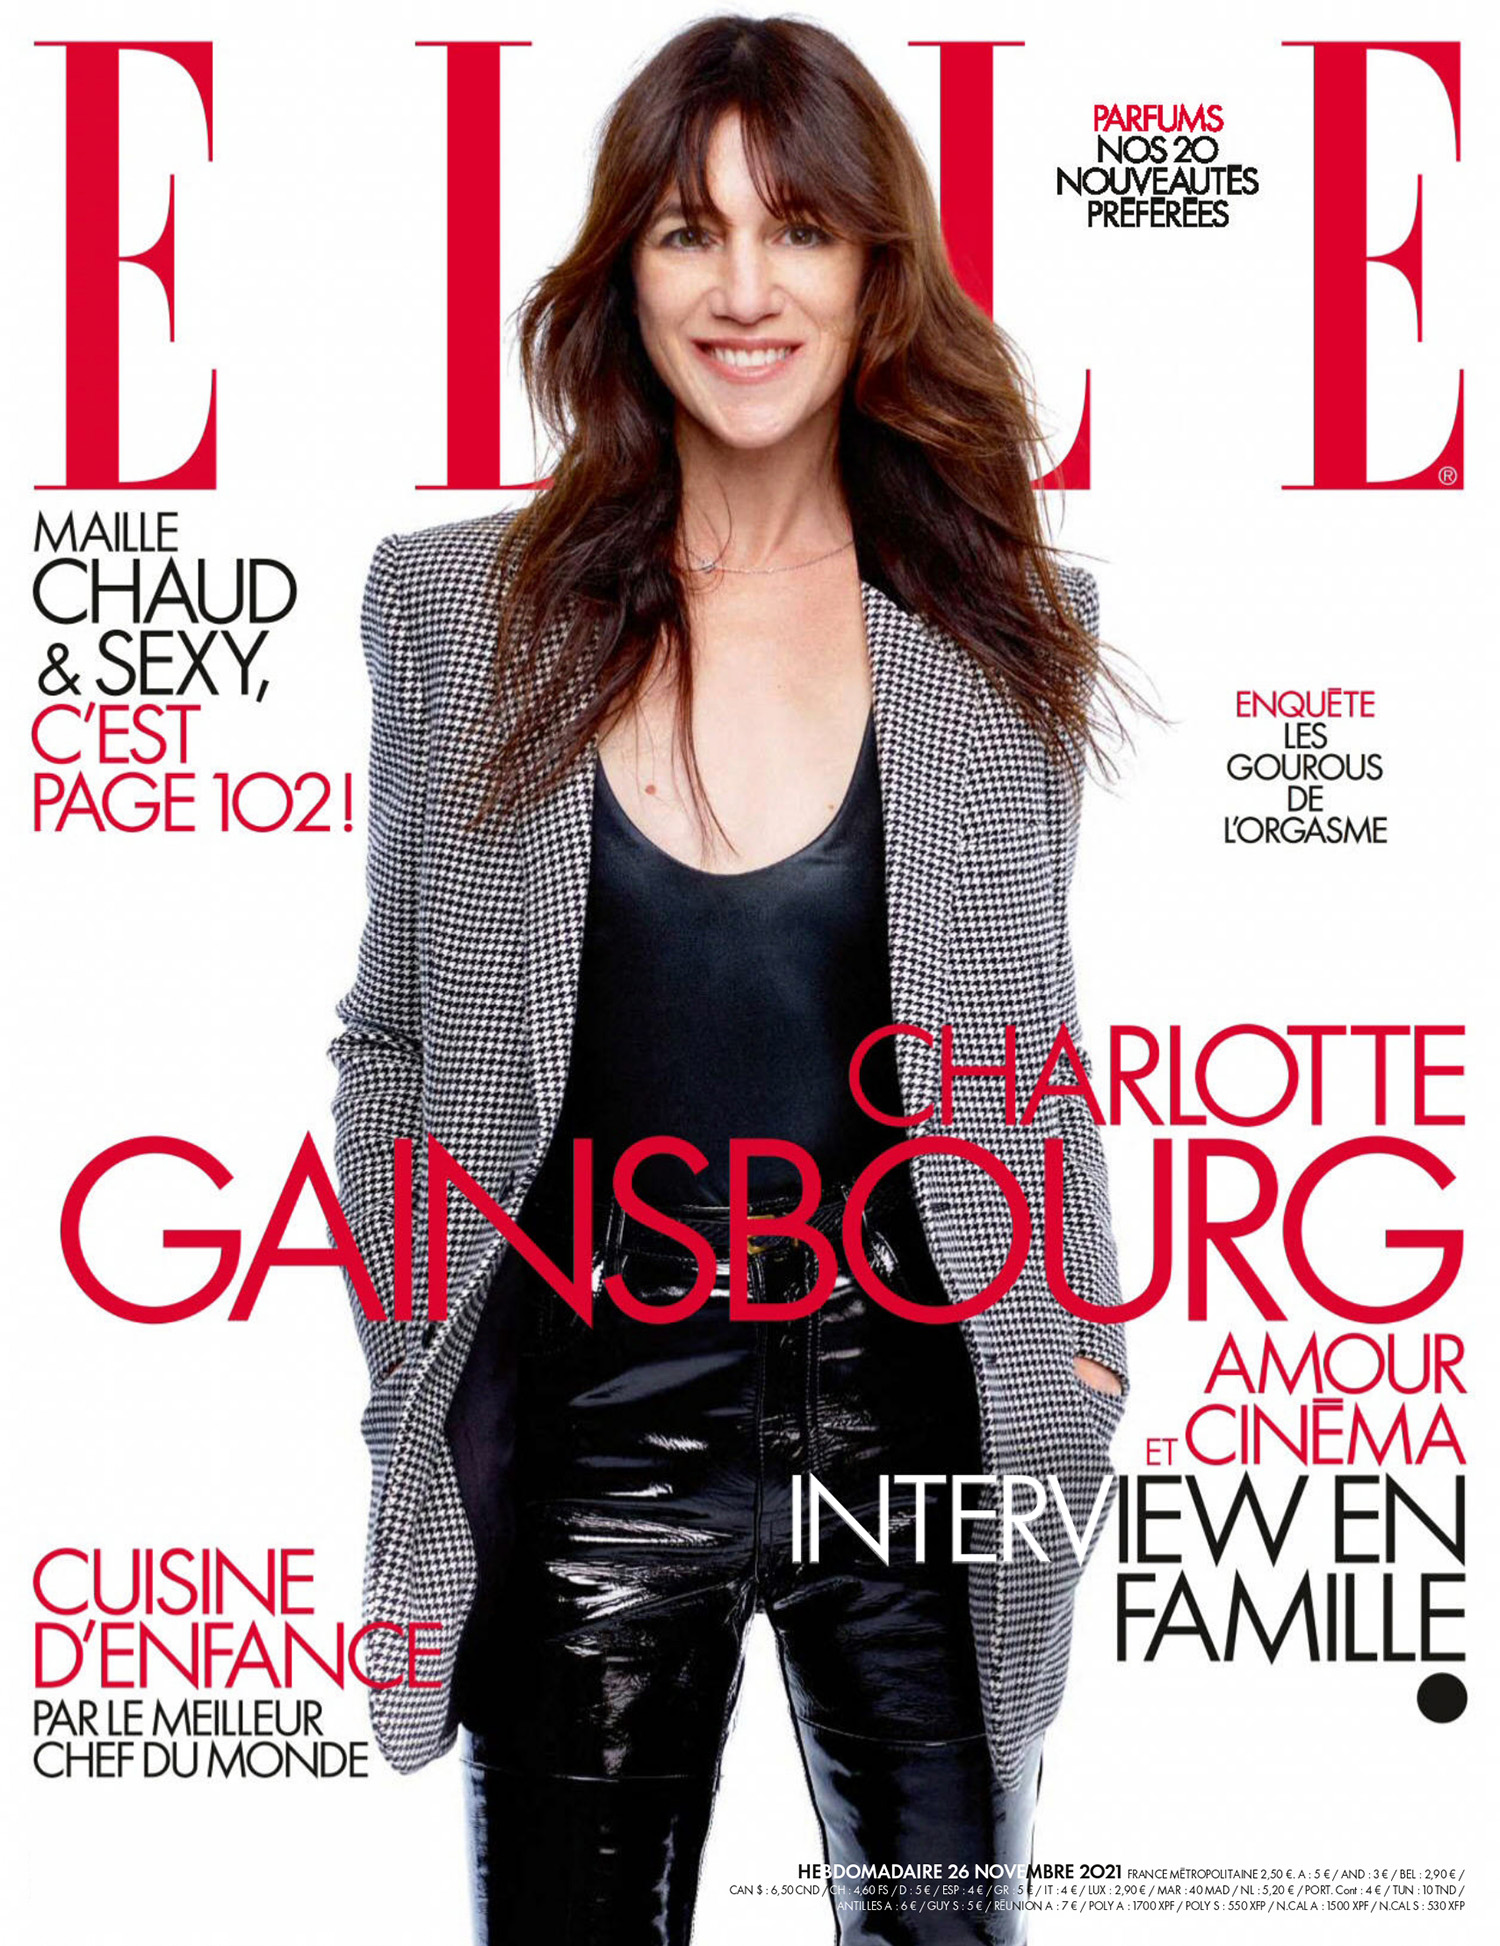 Charlotte Gainsbourg covers Elle France November 26th, 2021 by Nico Bustos